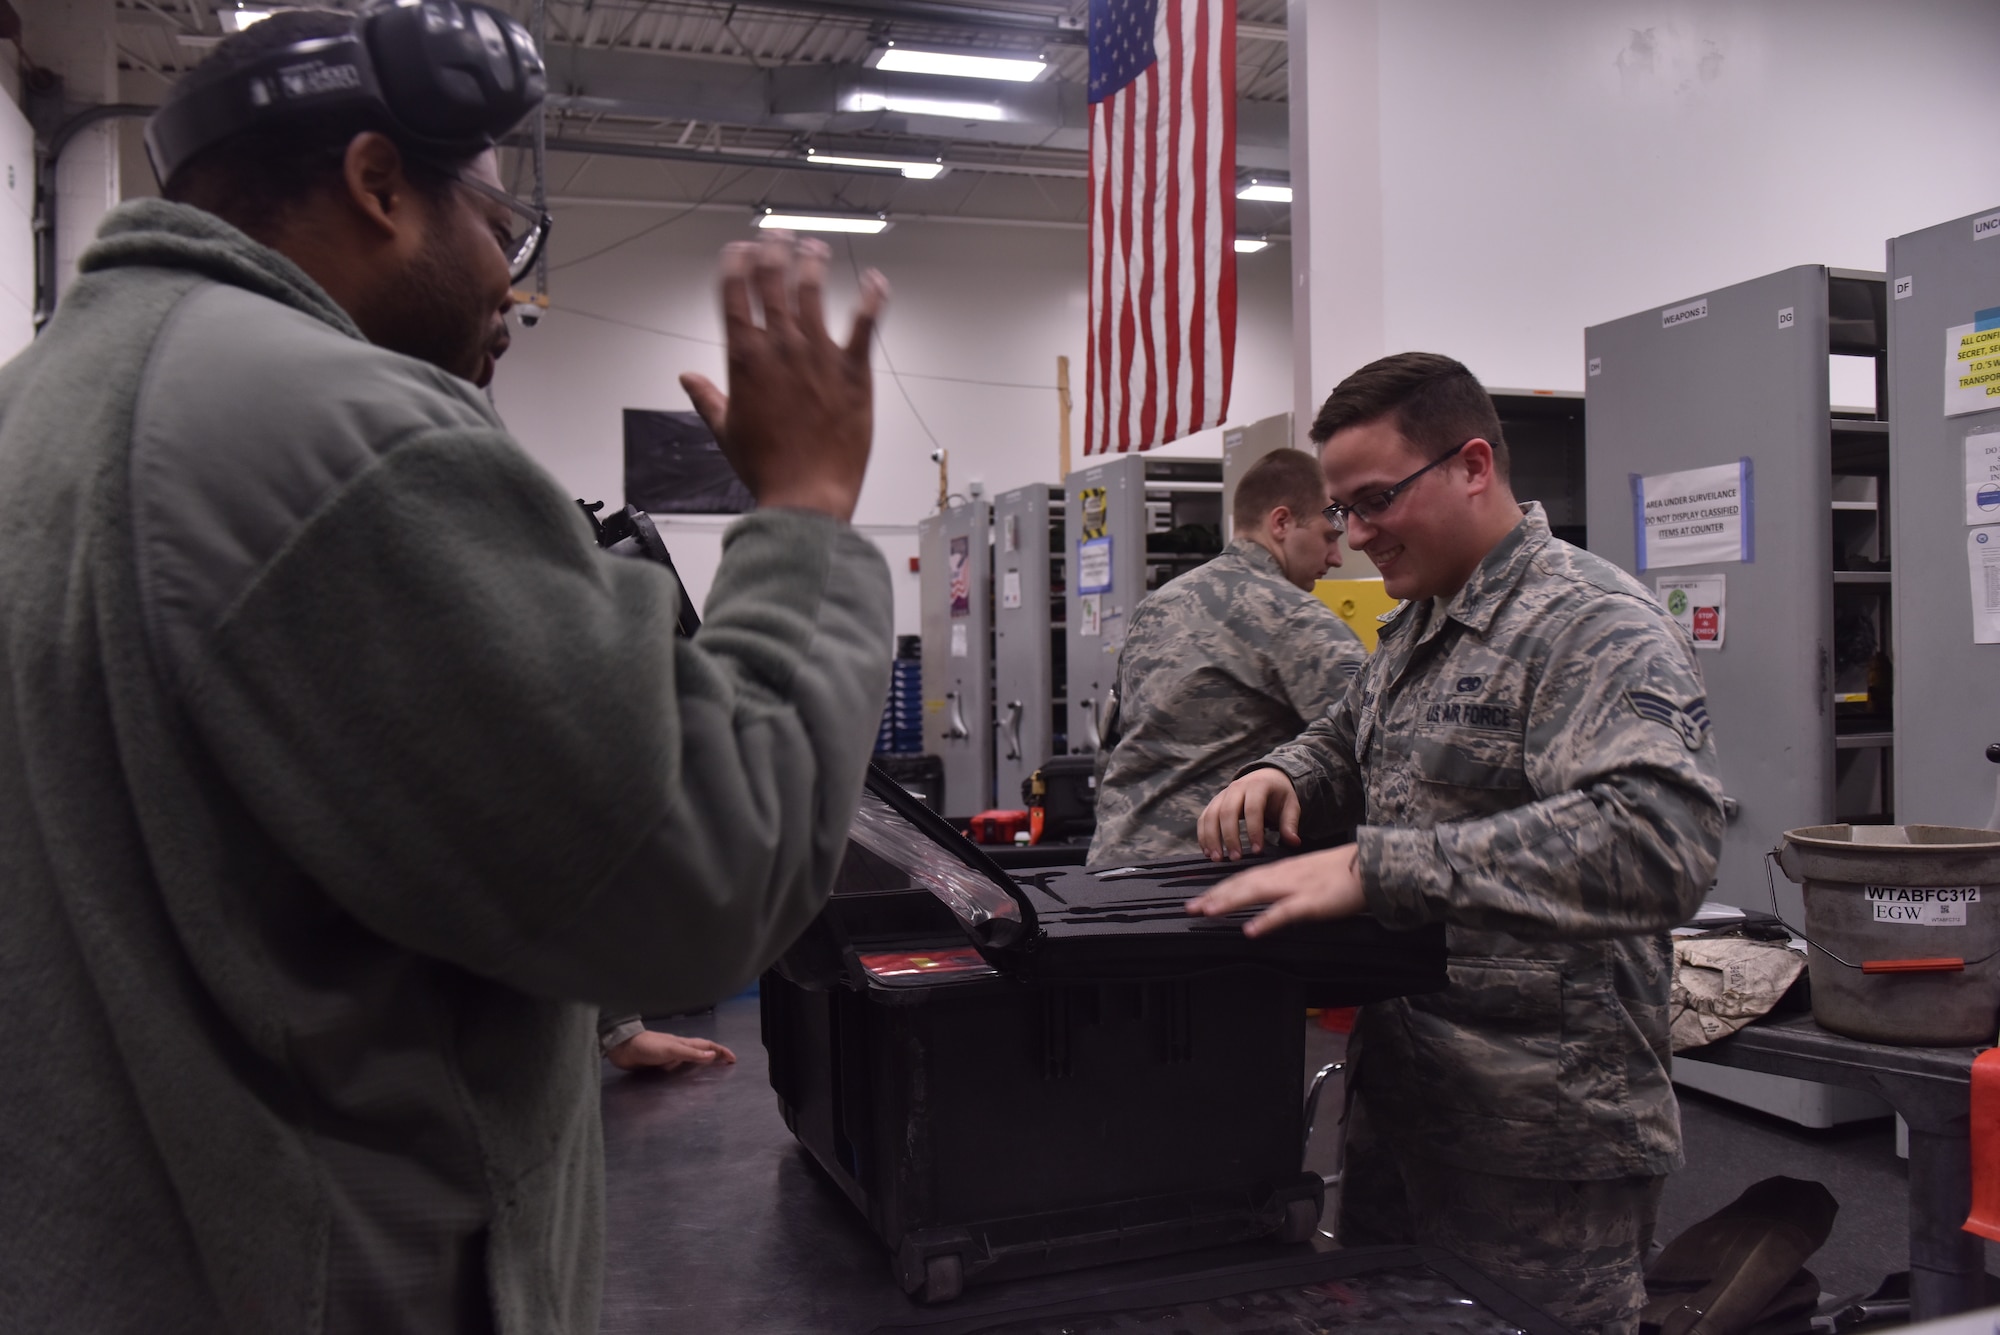 U.S. Air Force Senior Airman Daniel Meehan, a composite tool kit technician assigned to the 509th Aircraft Maintenance Squadron, helps a crew chief check out maintenance tools at Whiteman Air Force Base, Mo., April 10, 2018. In the supply building, the technicians control more than $15 million worth of equipment. (U.S. Air Force photo by Senior Airman Jovan Banks)